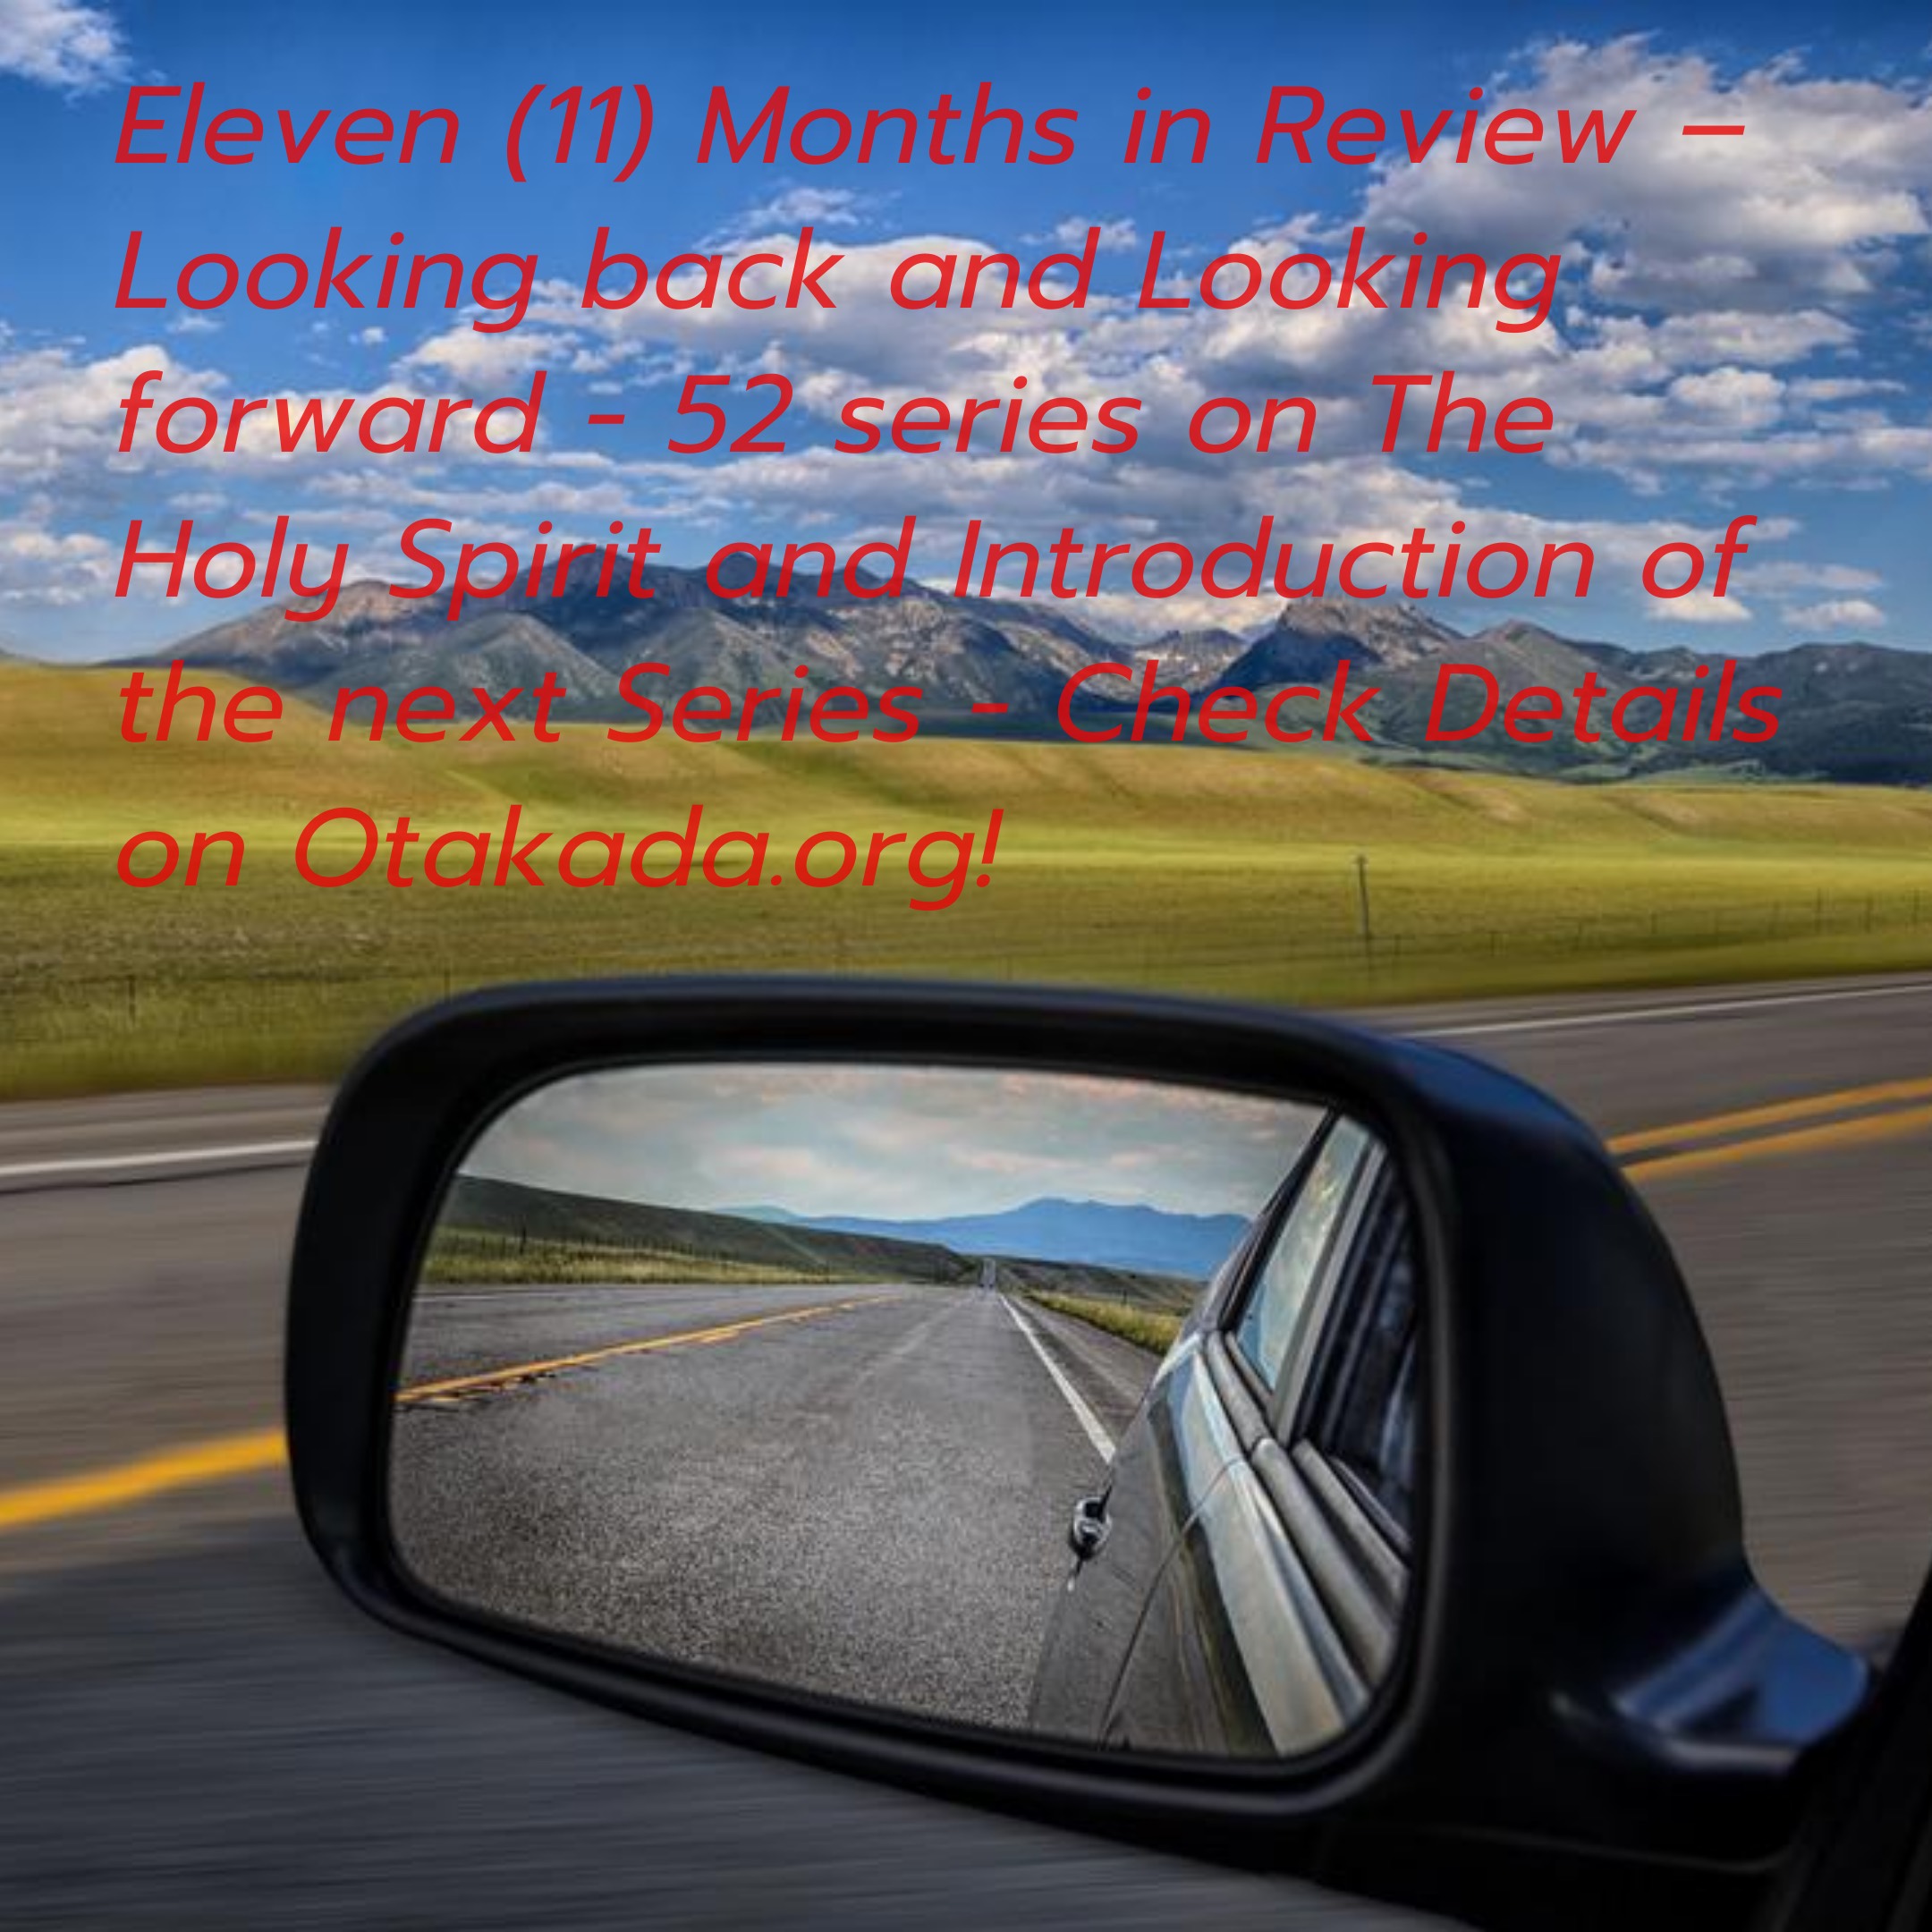 Eleven (11) Months in Review – Looking back and Looking forward - 52 series on The Holy Spirit and Introduction of the next Series